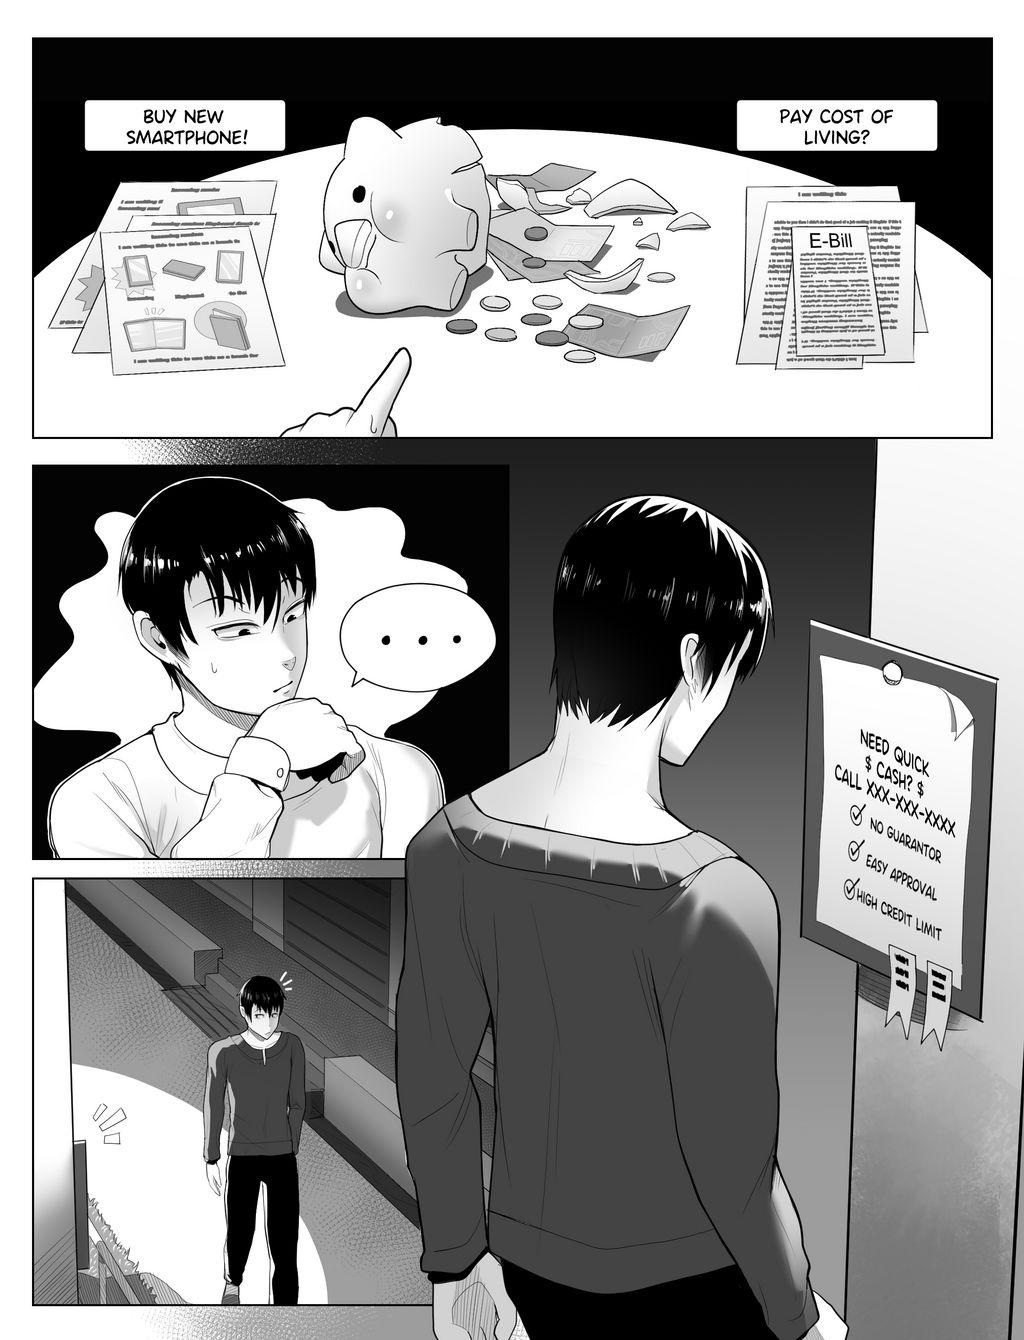 Comic] SCP-1471-16-Lite by vavacung on DeviantArt